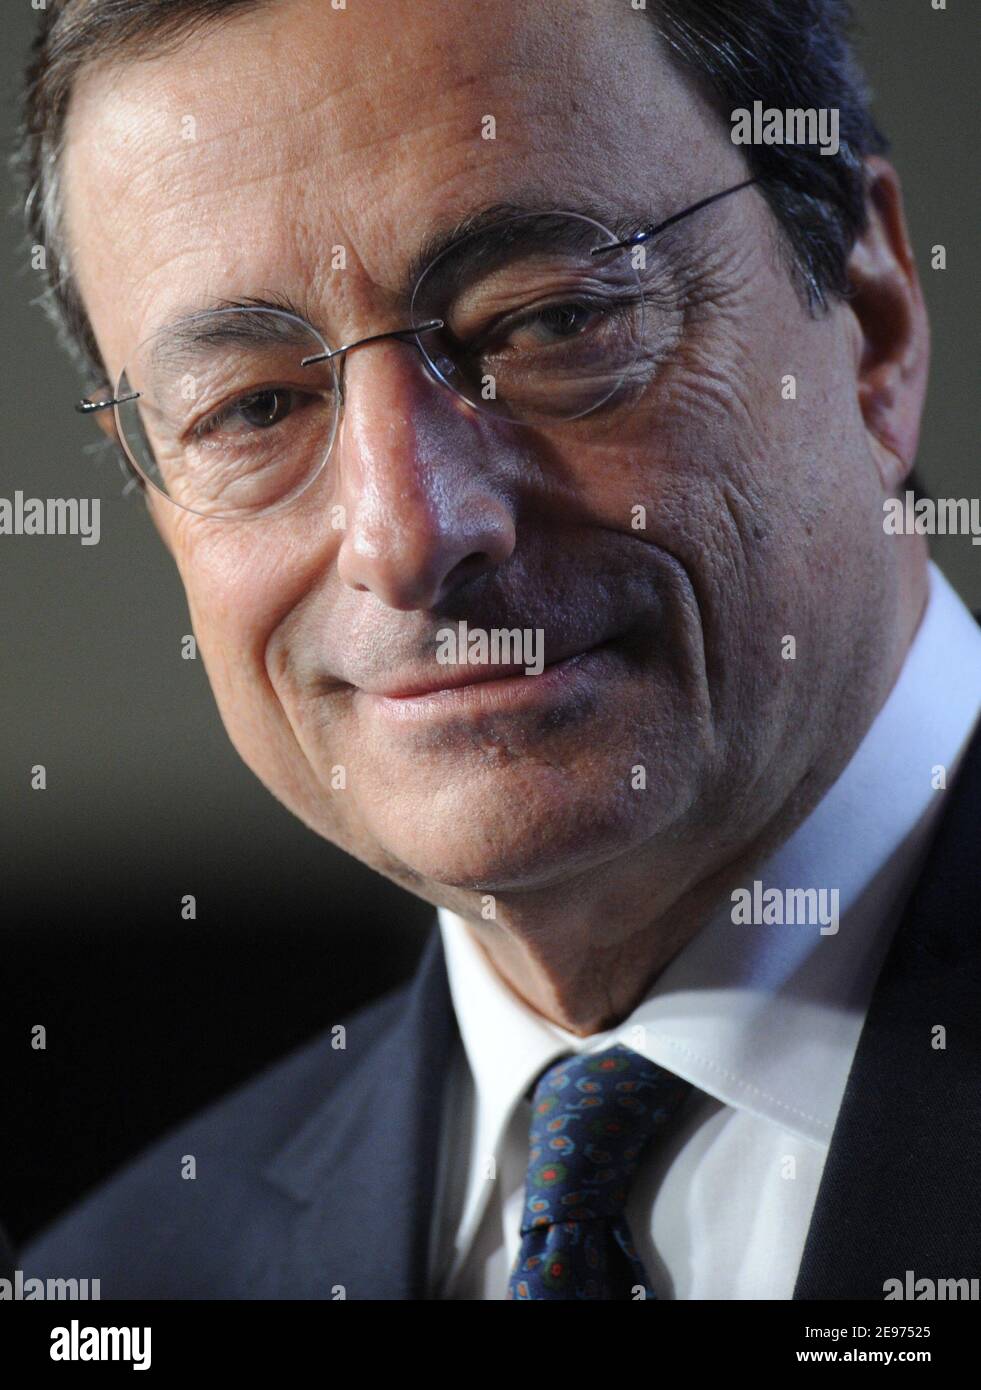 File photo dated November 4, 2011 of European Central Bank's chief Mario Draghi is pictured during a press conference on the G20 Summit of Heads of State and Government in Cannes, southeastern France. Mario Draghi, the former chief of the European Central Bank, has been summoned to a Wednesday meeting with Italy's president in a bid to solve the country's political crisis. President Sergio Mattarella said he wants a non-political government to be rapidly formed to lead Italy during the coronavirus pandemic. Photo by Mousse/ABACAPRESS.COM Stock Photo